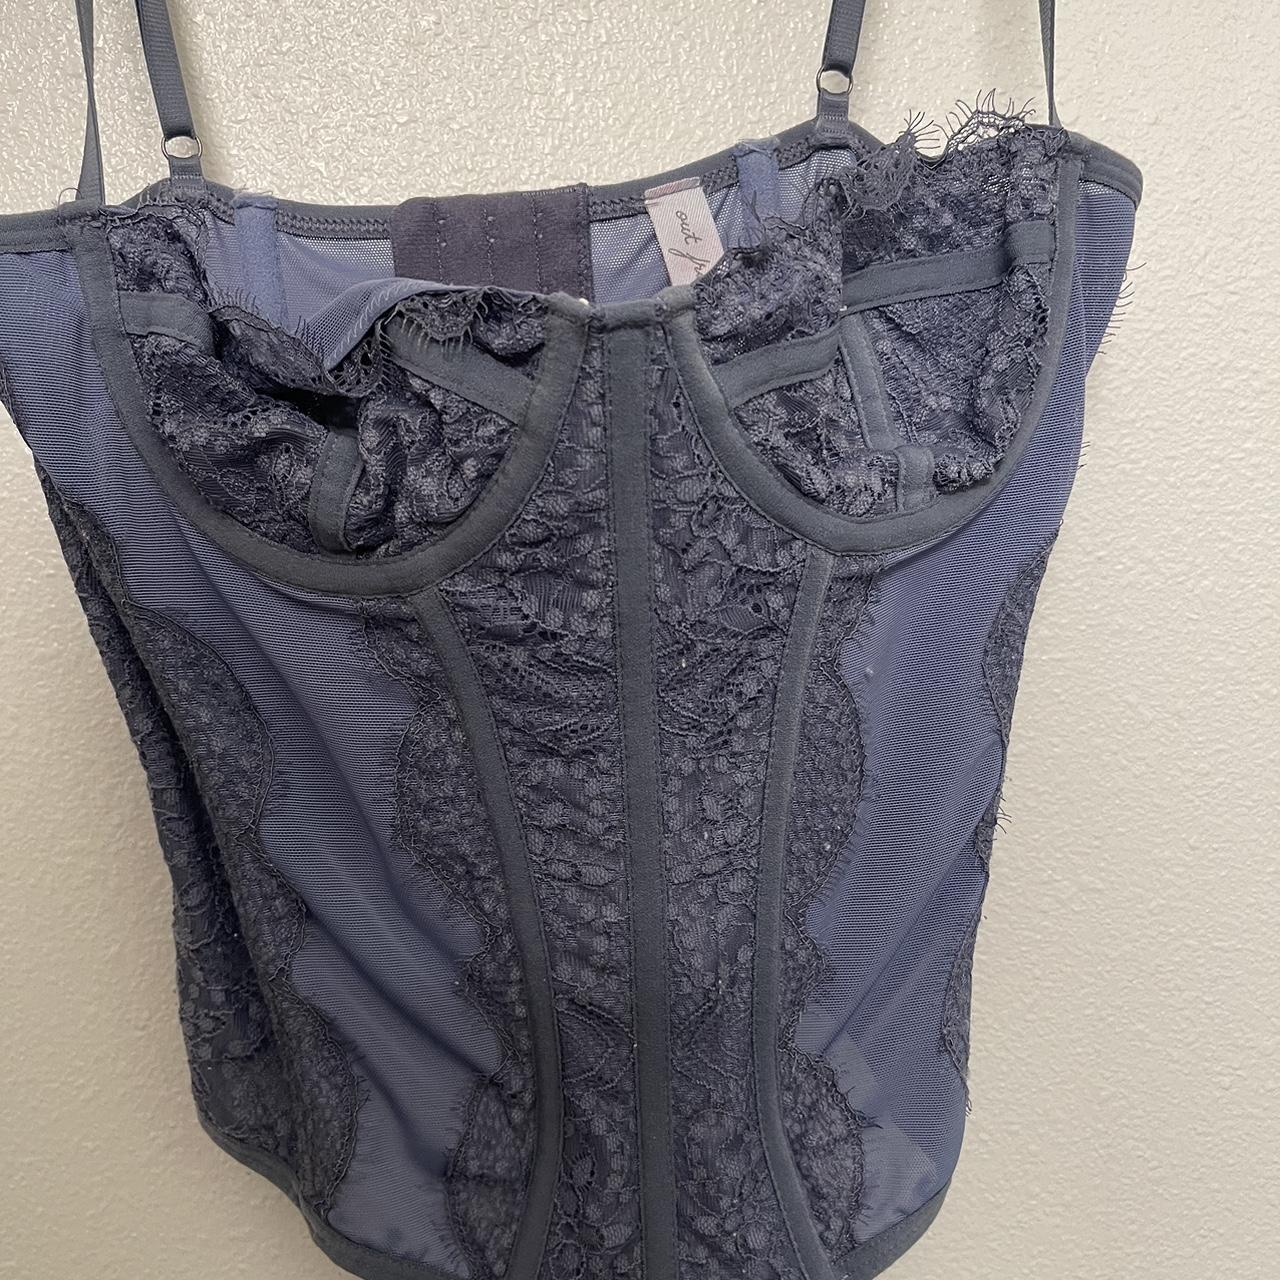 Urban Outfitters Out From Under Modern Love Corset - Depop